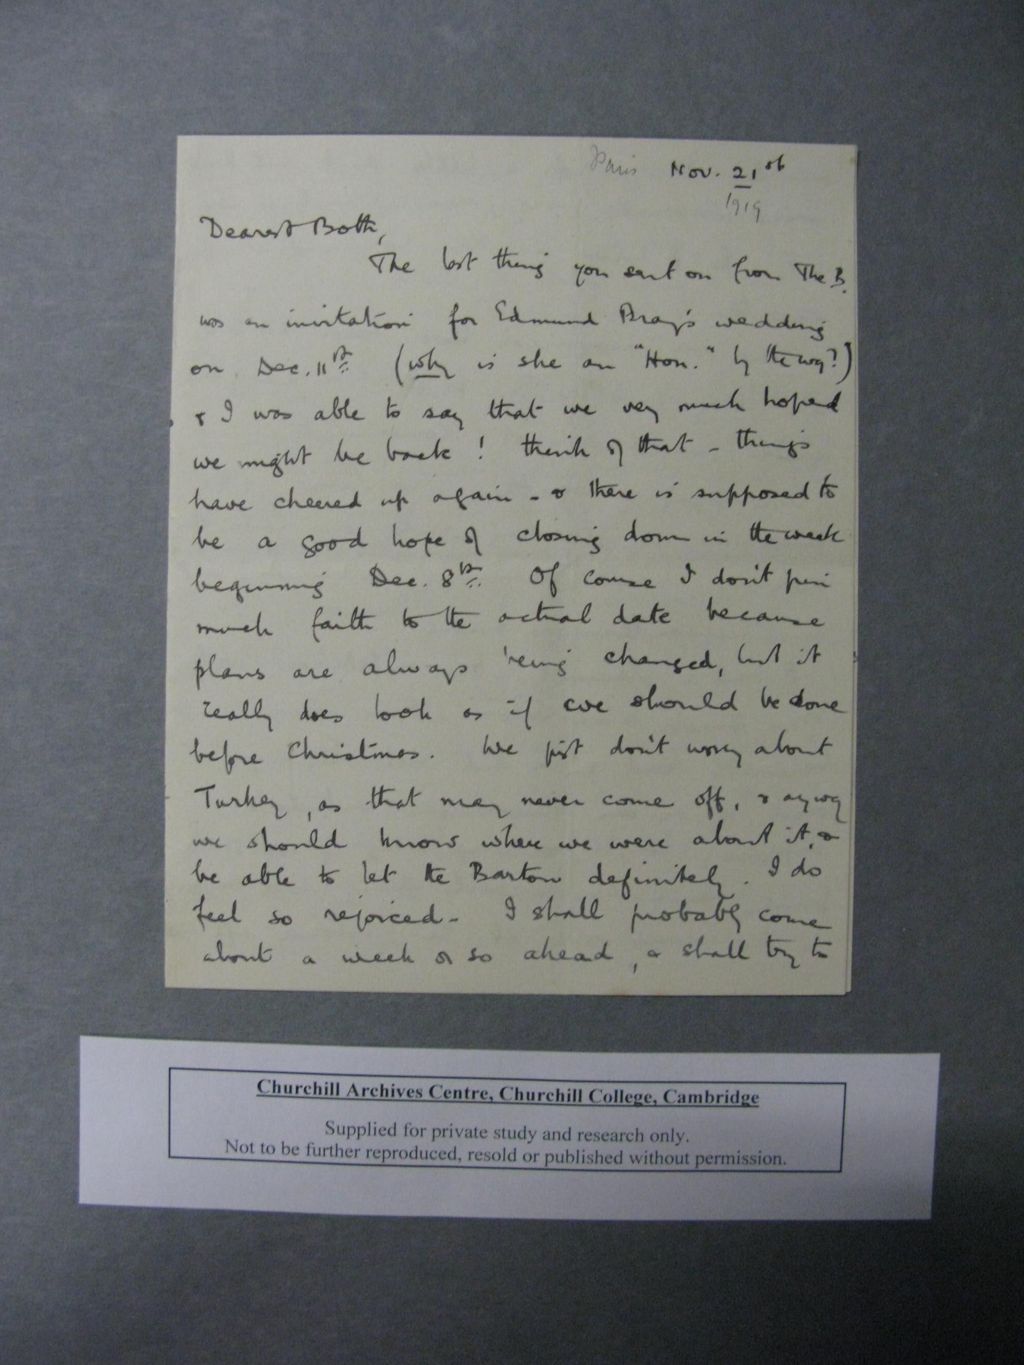 Miniature of Letters from Margaret Malkin to her parents from the Paris Peace Conference